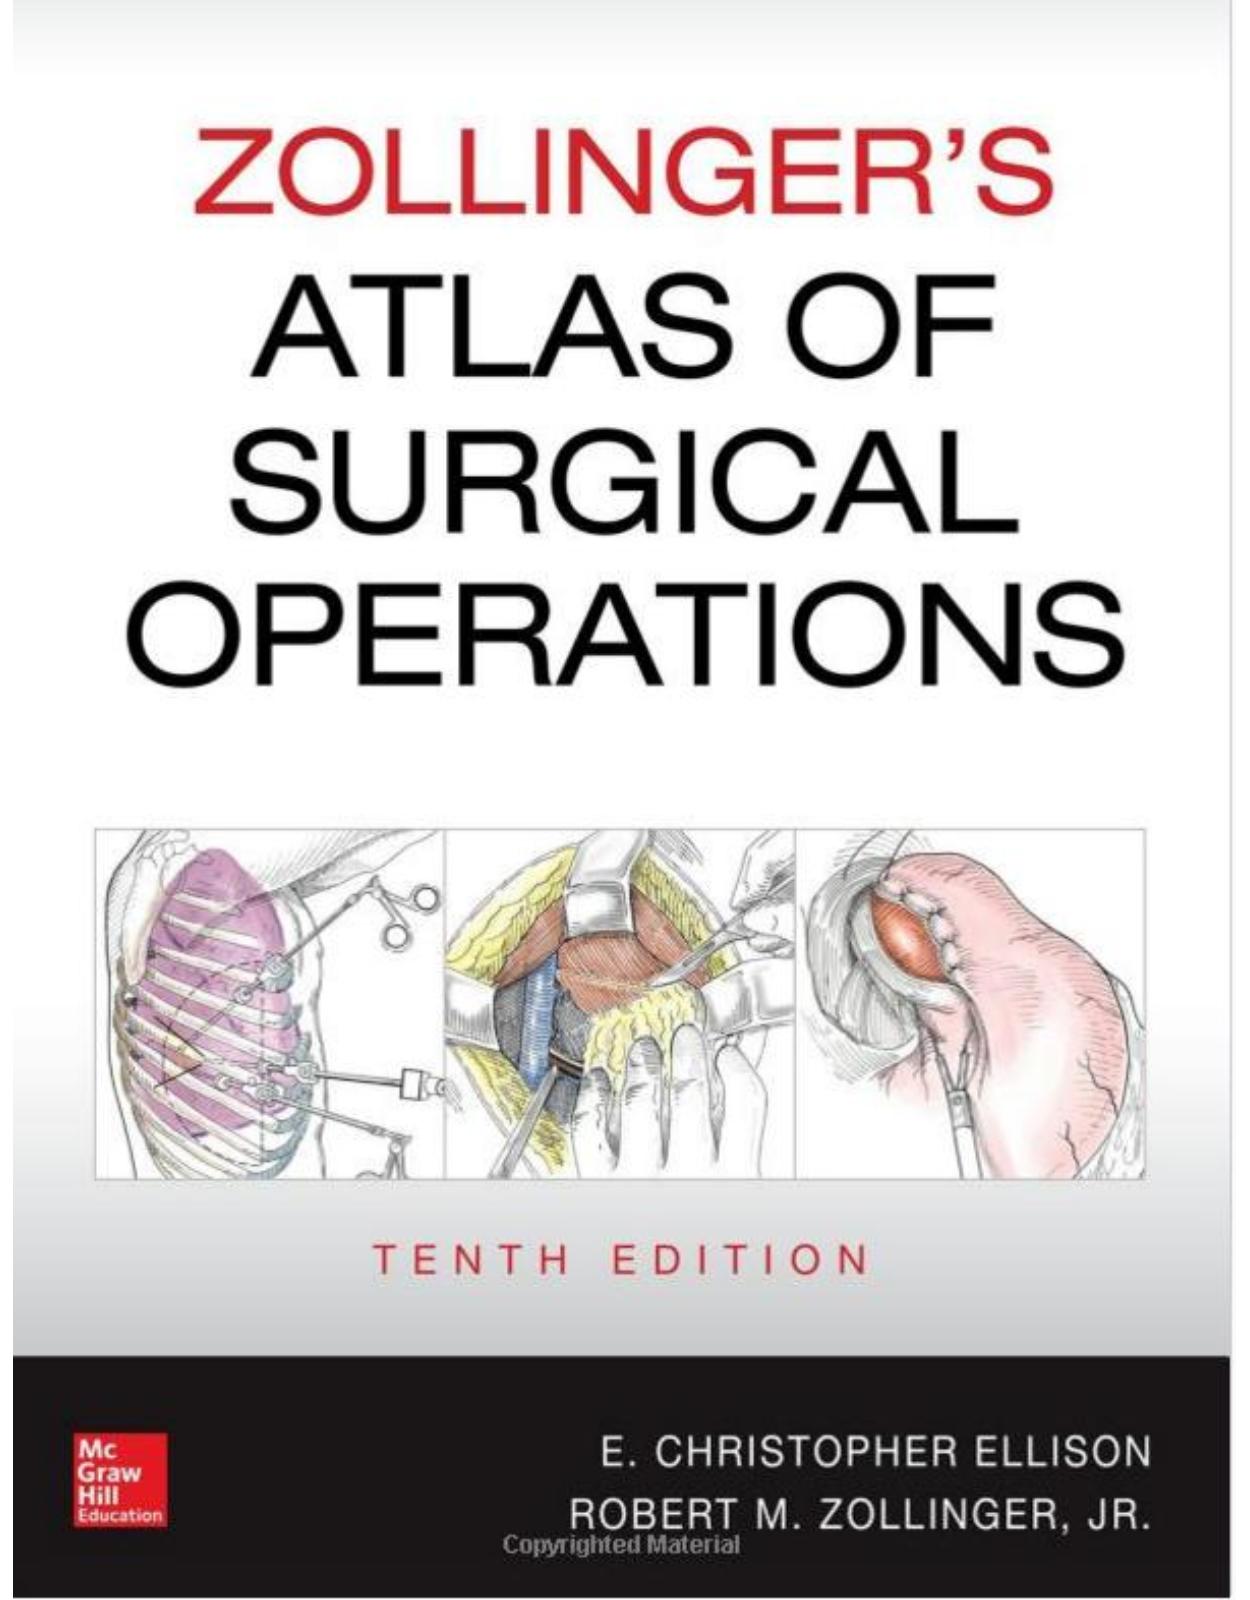 Zollinger’s Atlas of Surgical Operations, 10th edition